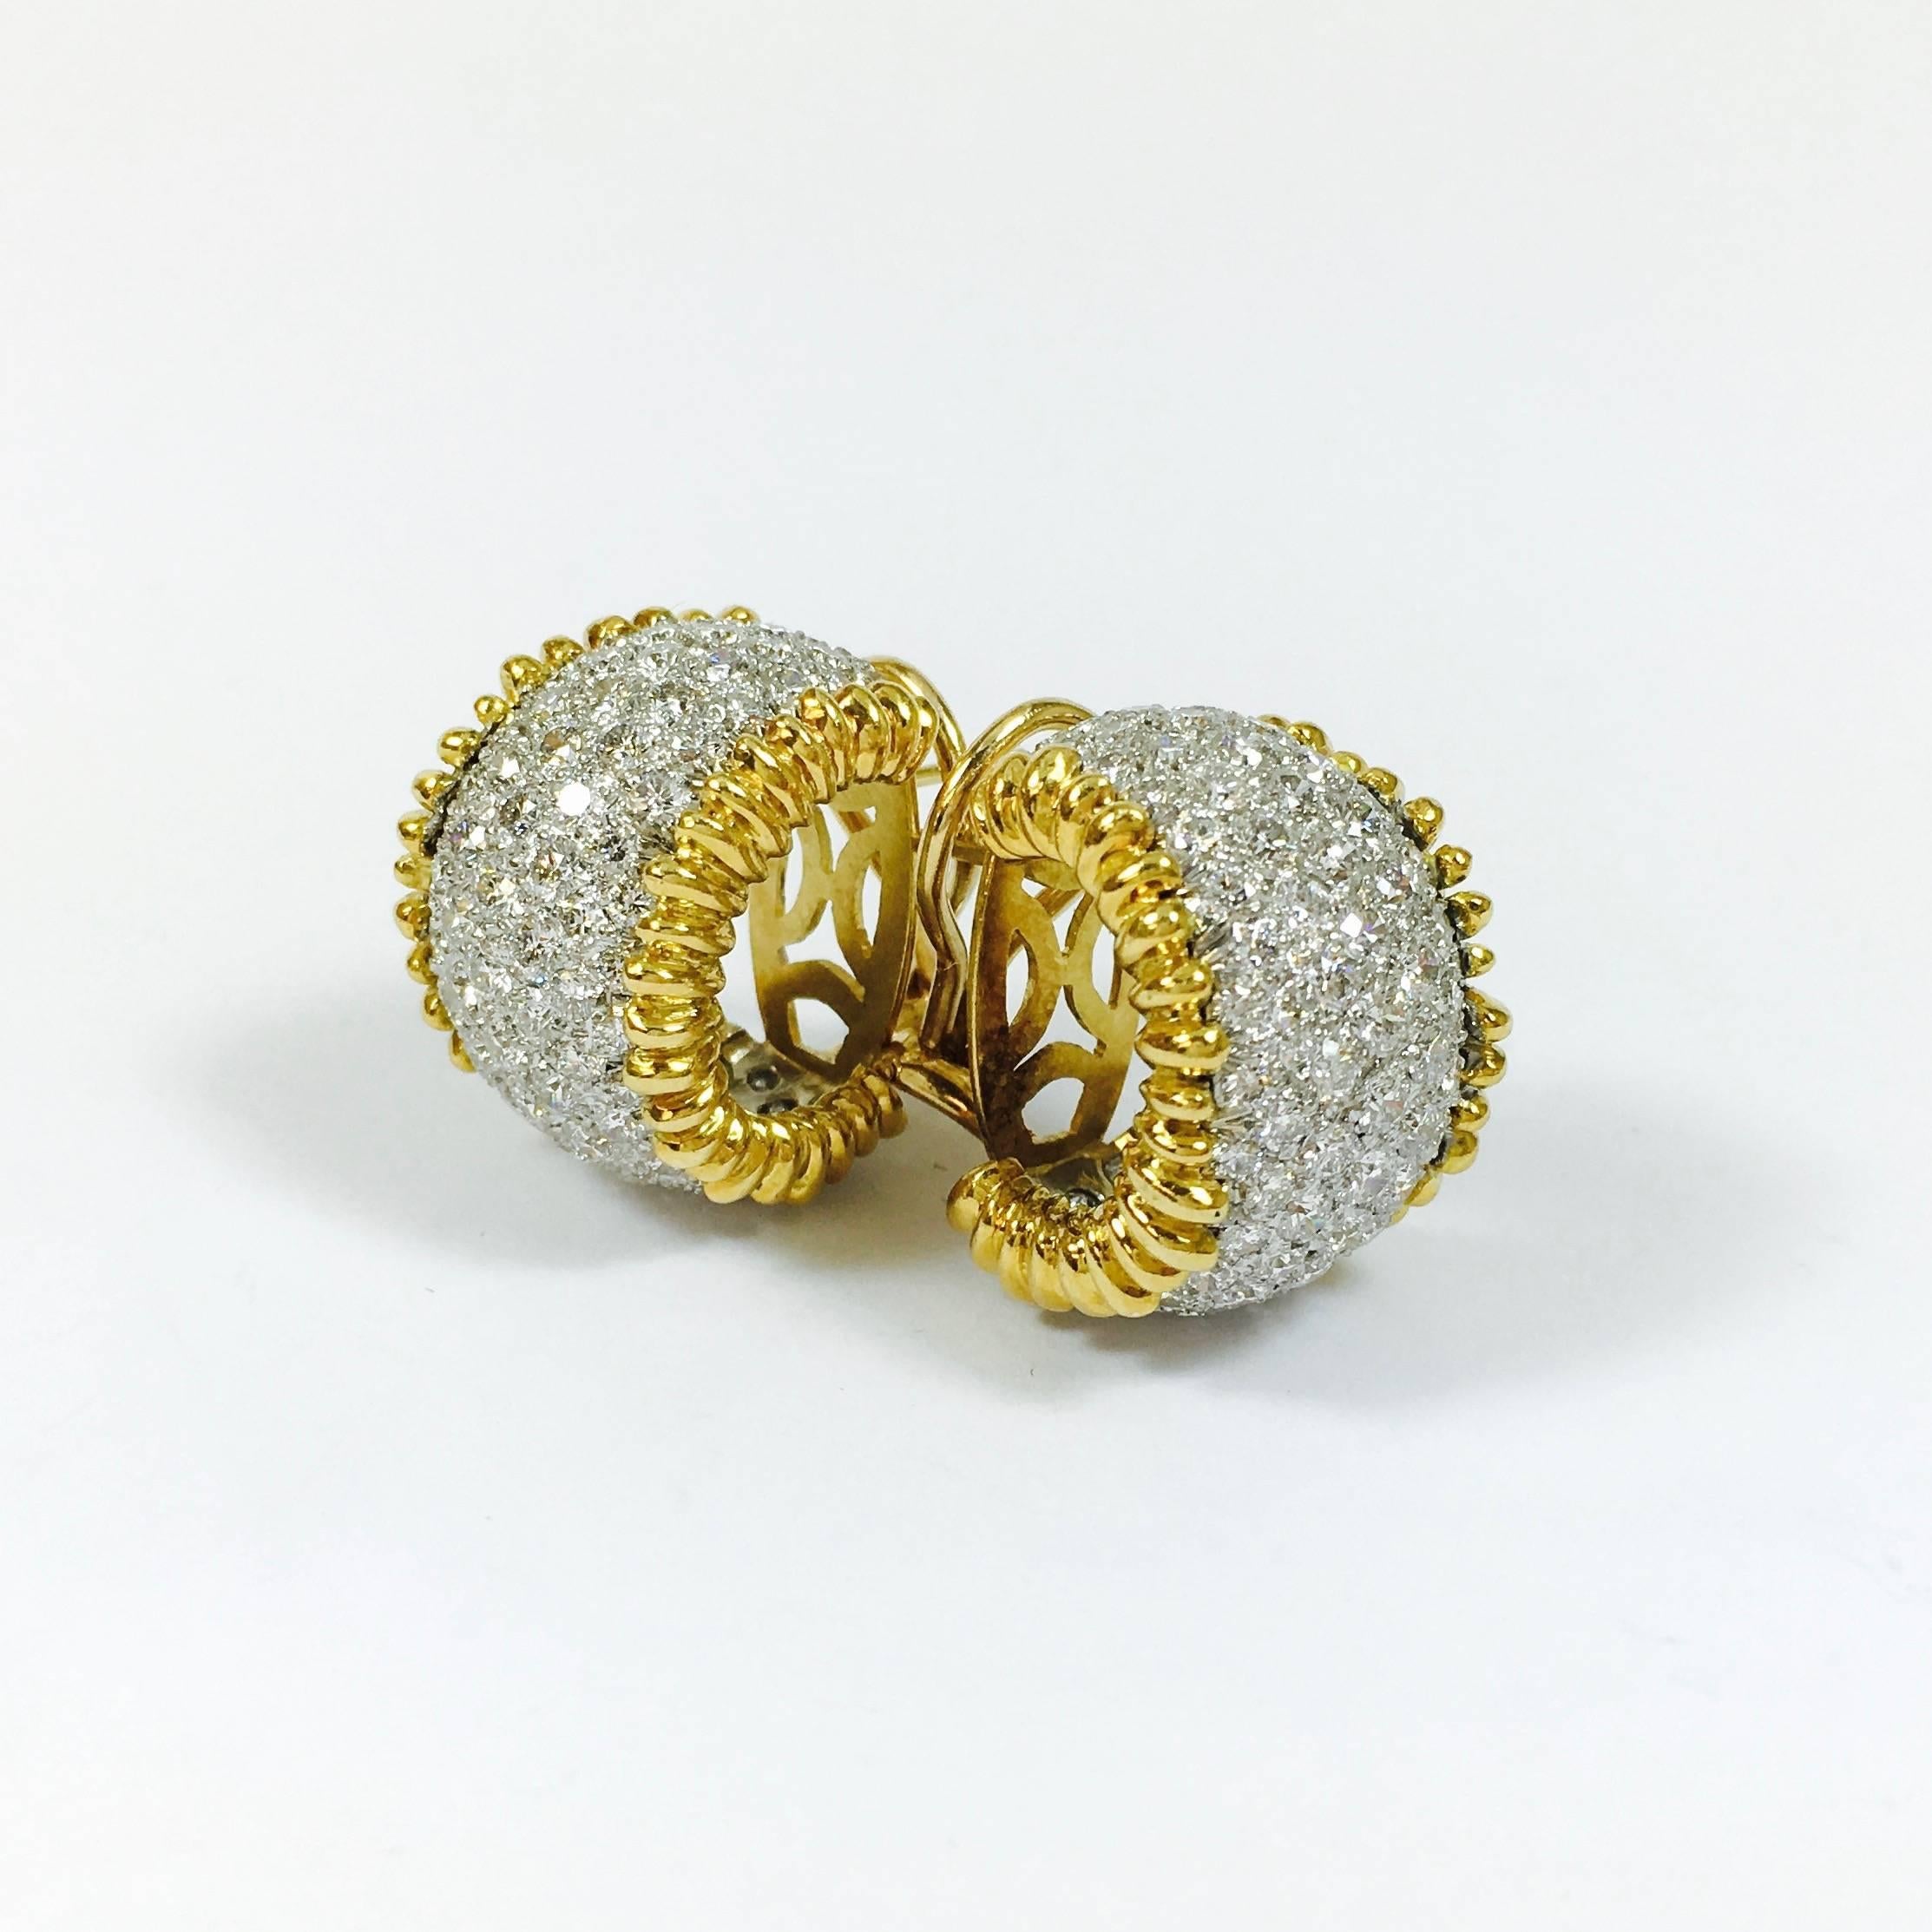 Crafted in 18K white and yellow gold, these amazing vintage diamond hoop earrings  are set with approximately 7.20 carats of round brilliant cut diamonds.
Color: F-G, Clarity: VS1-VS2
Each earring measures: 22 mm Hight x 16 mm Wide 
Weight: 22.7